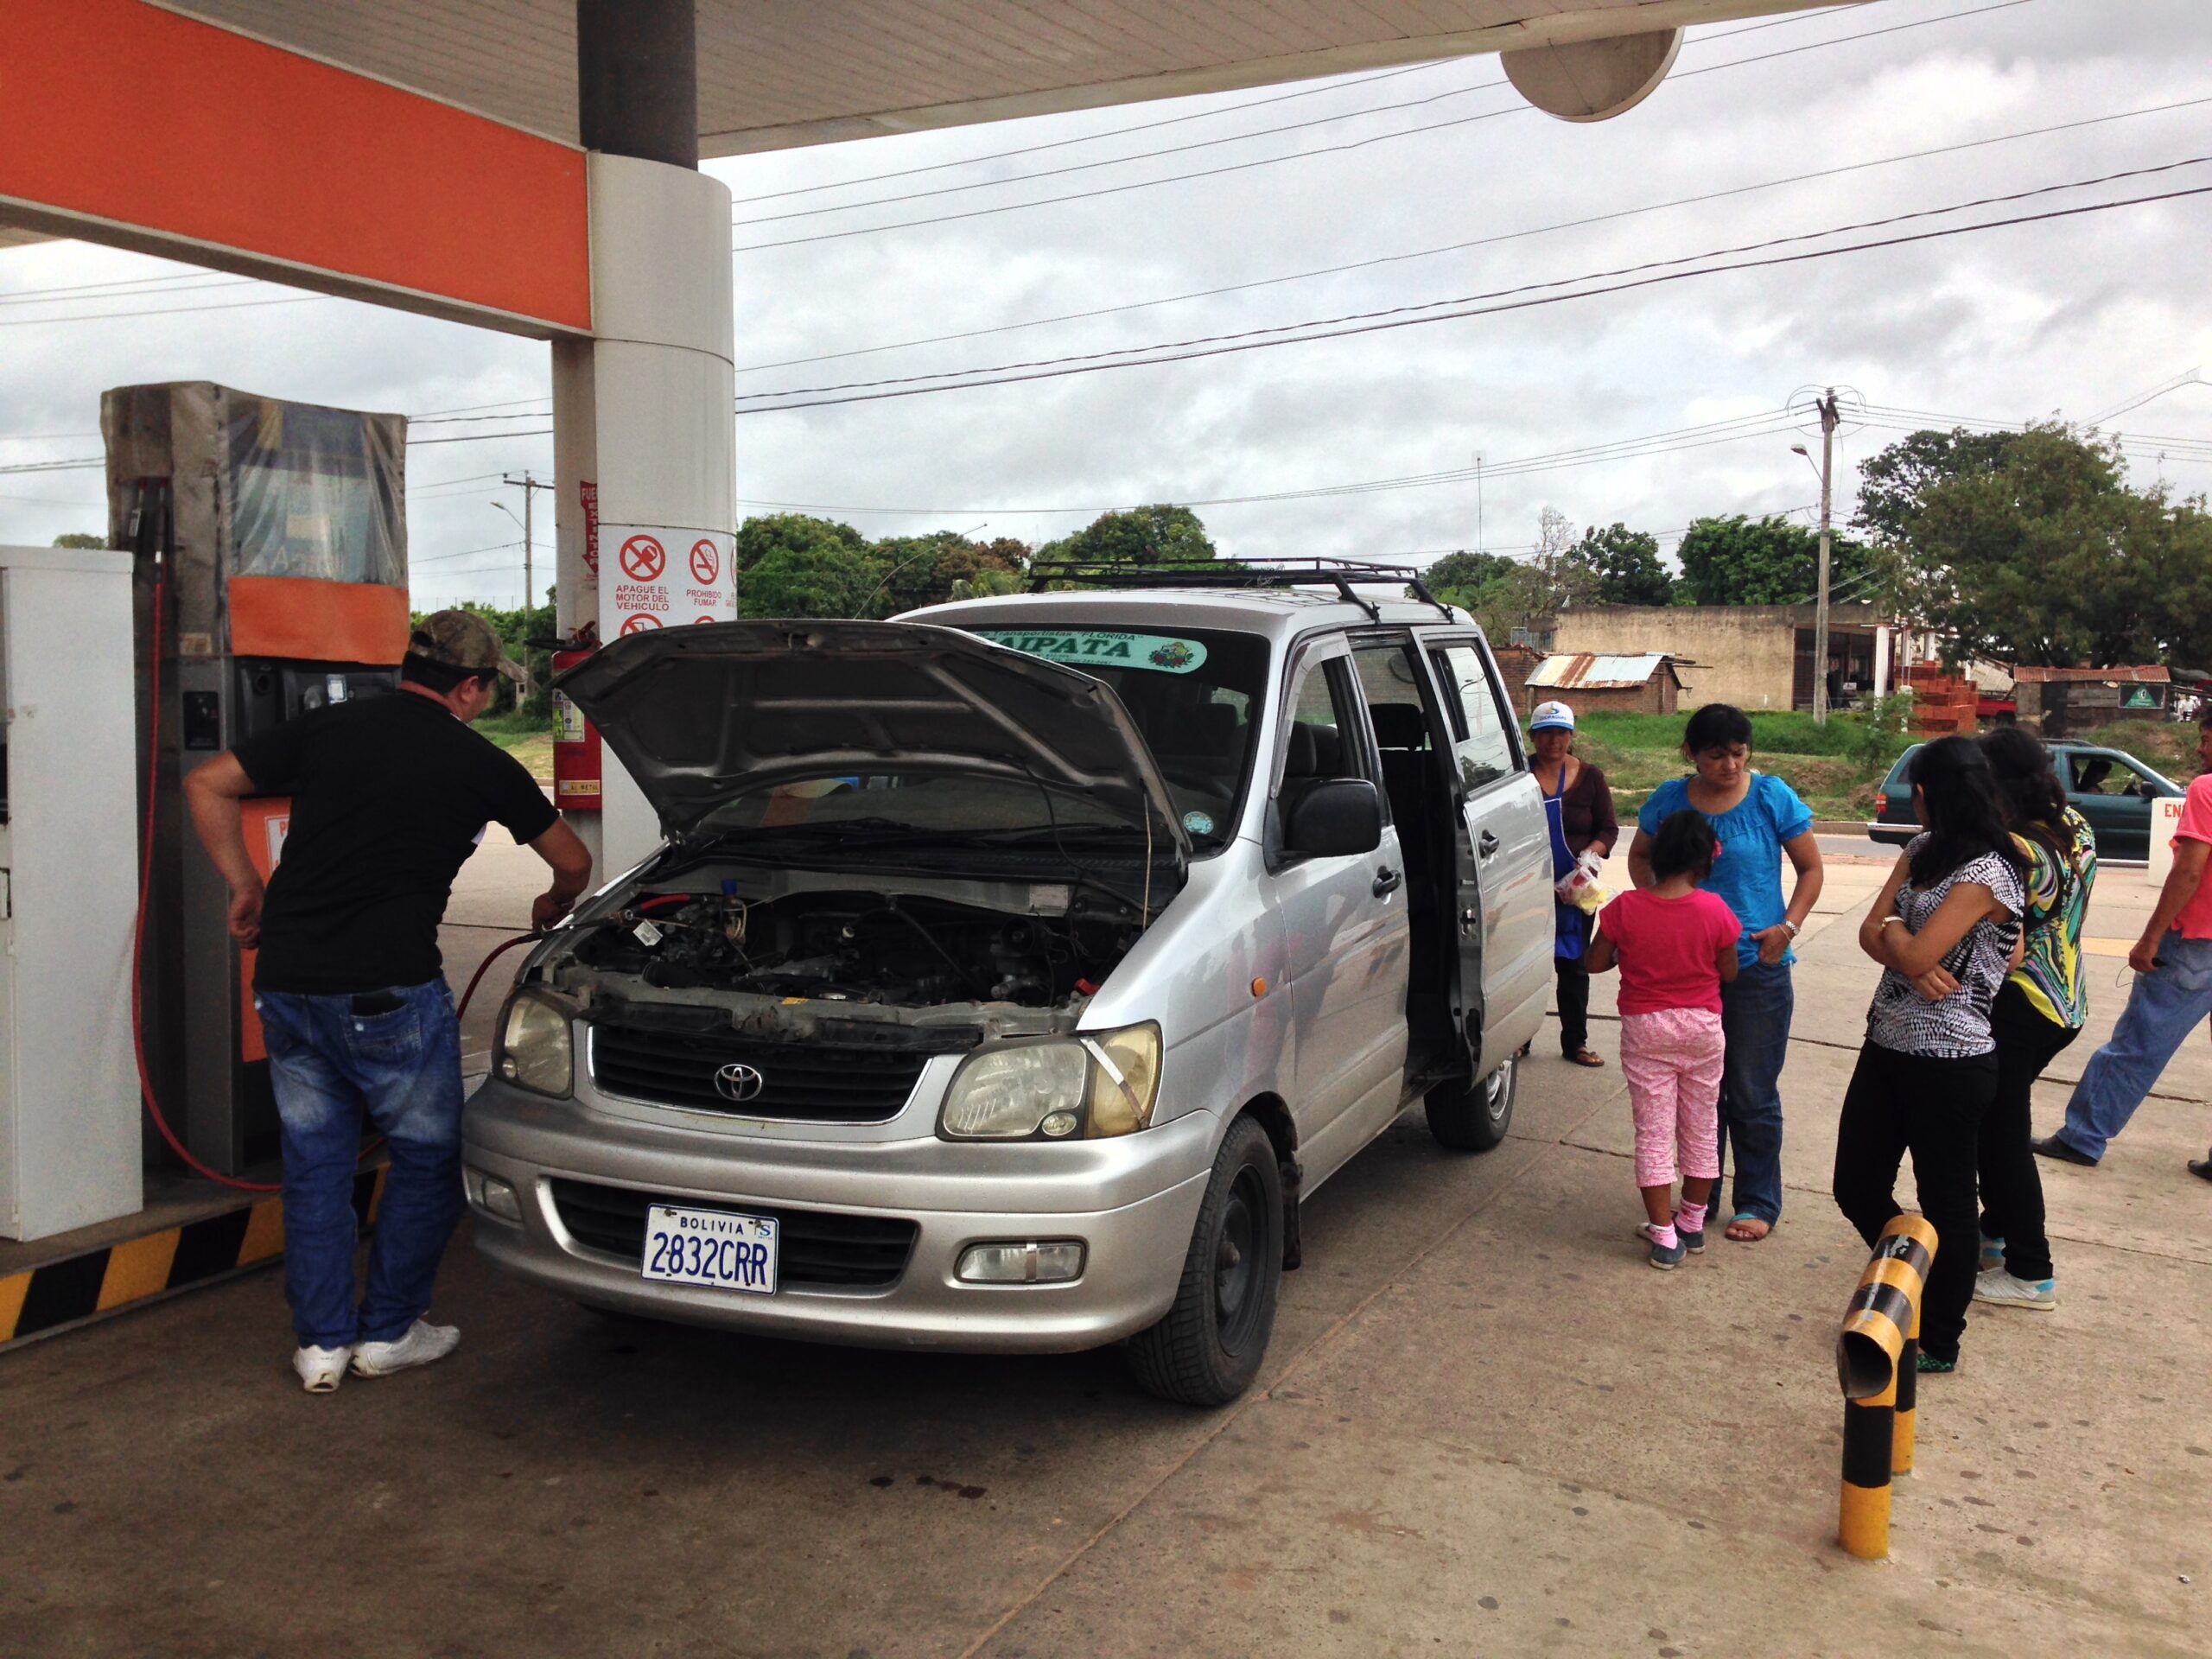 In Bolivia, all vehicle passengers are required to exit the car during refueling.